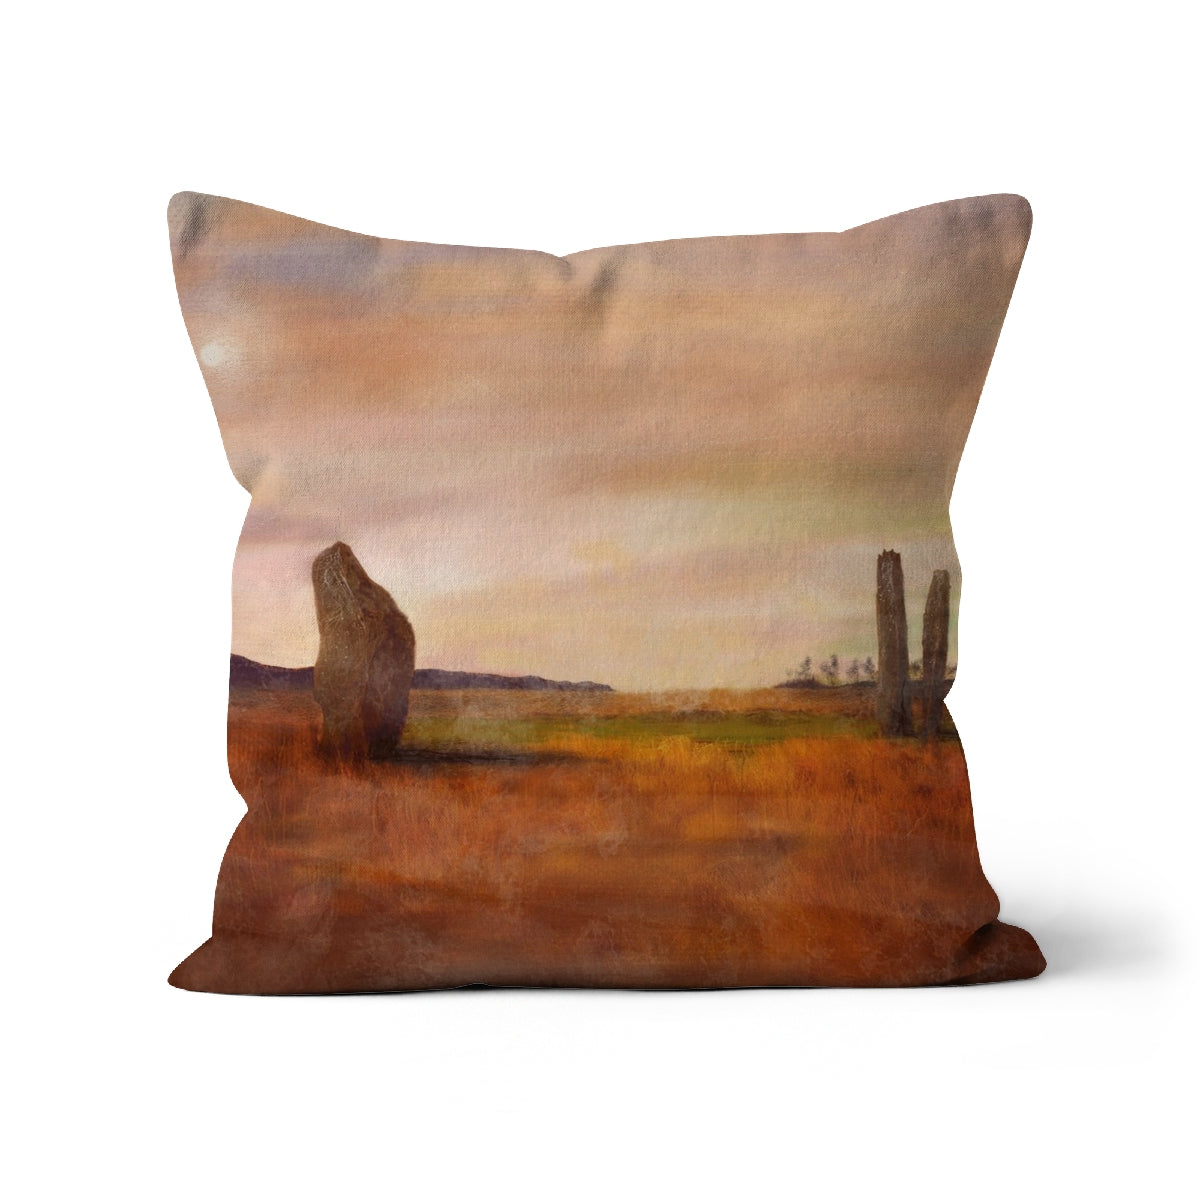 Machrie Moor Arran Art Gifts Cushion-Cushions-Arran Art Gallery-Faux Suede-22"x22"-Paintings, Prints, Homeware, Art Gifts From Scotland By Scottish Artist Kevin Hunter